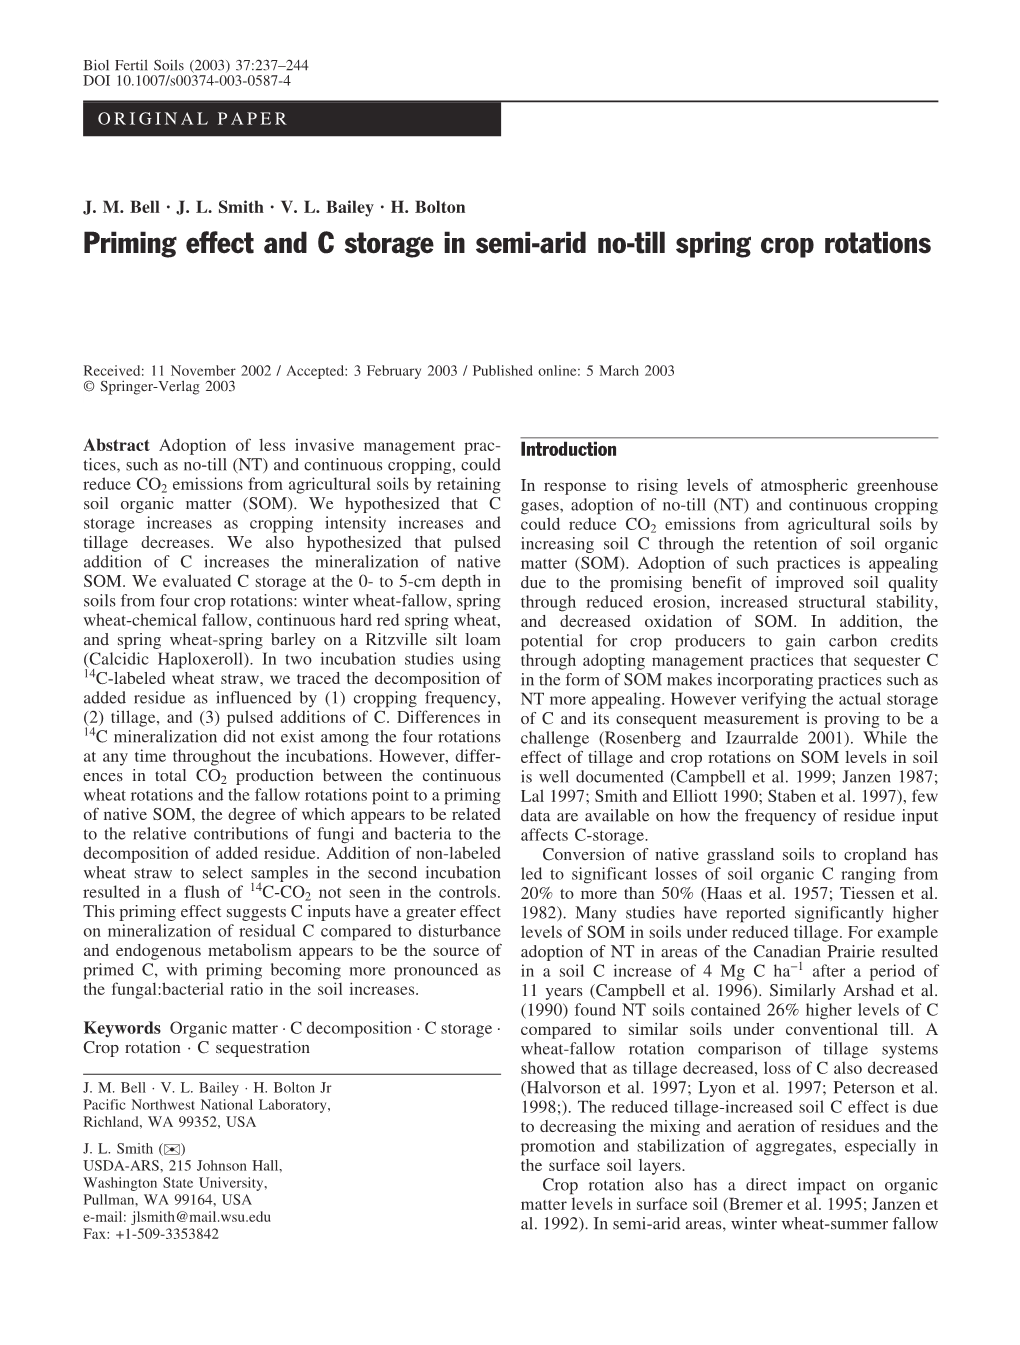 Priming Effect and C Storage in Semi-Arid No-Till Spring Crop Rotations